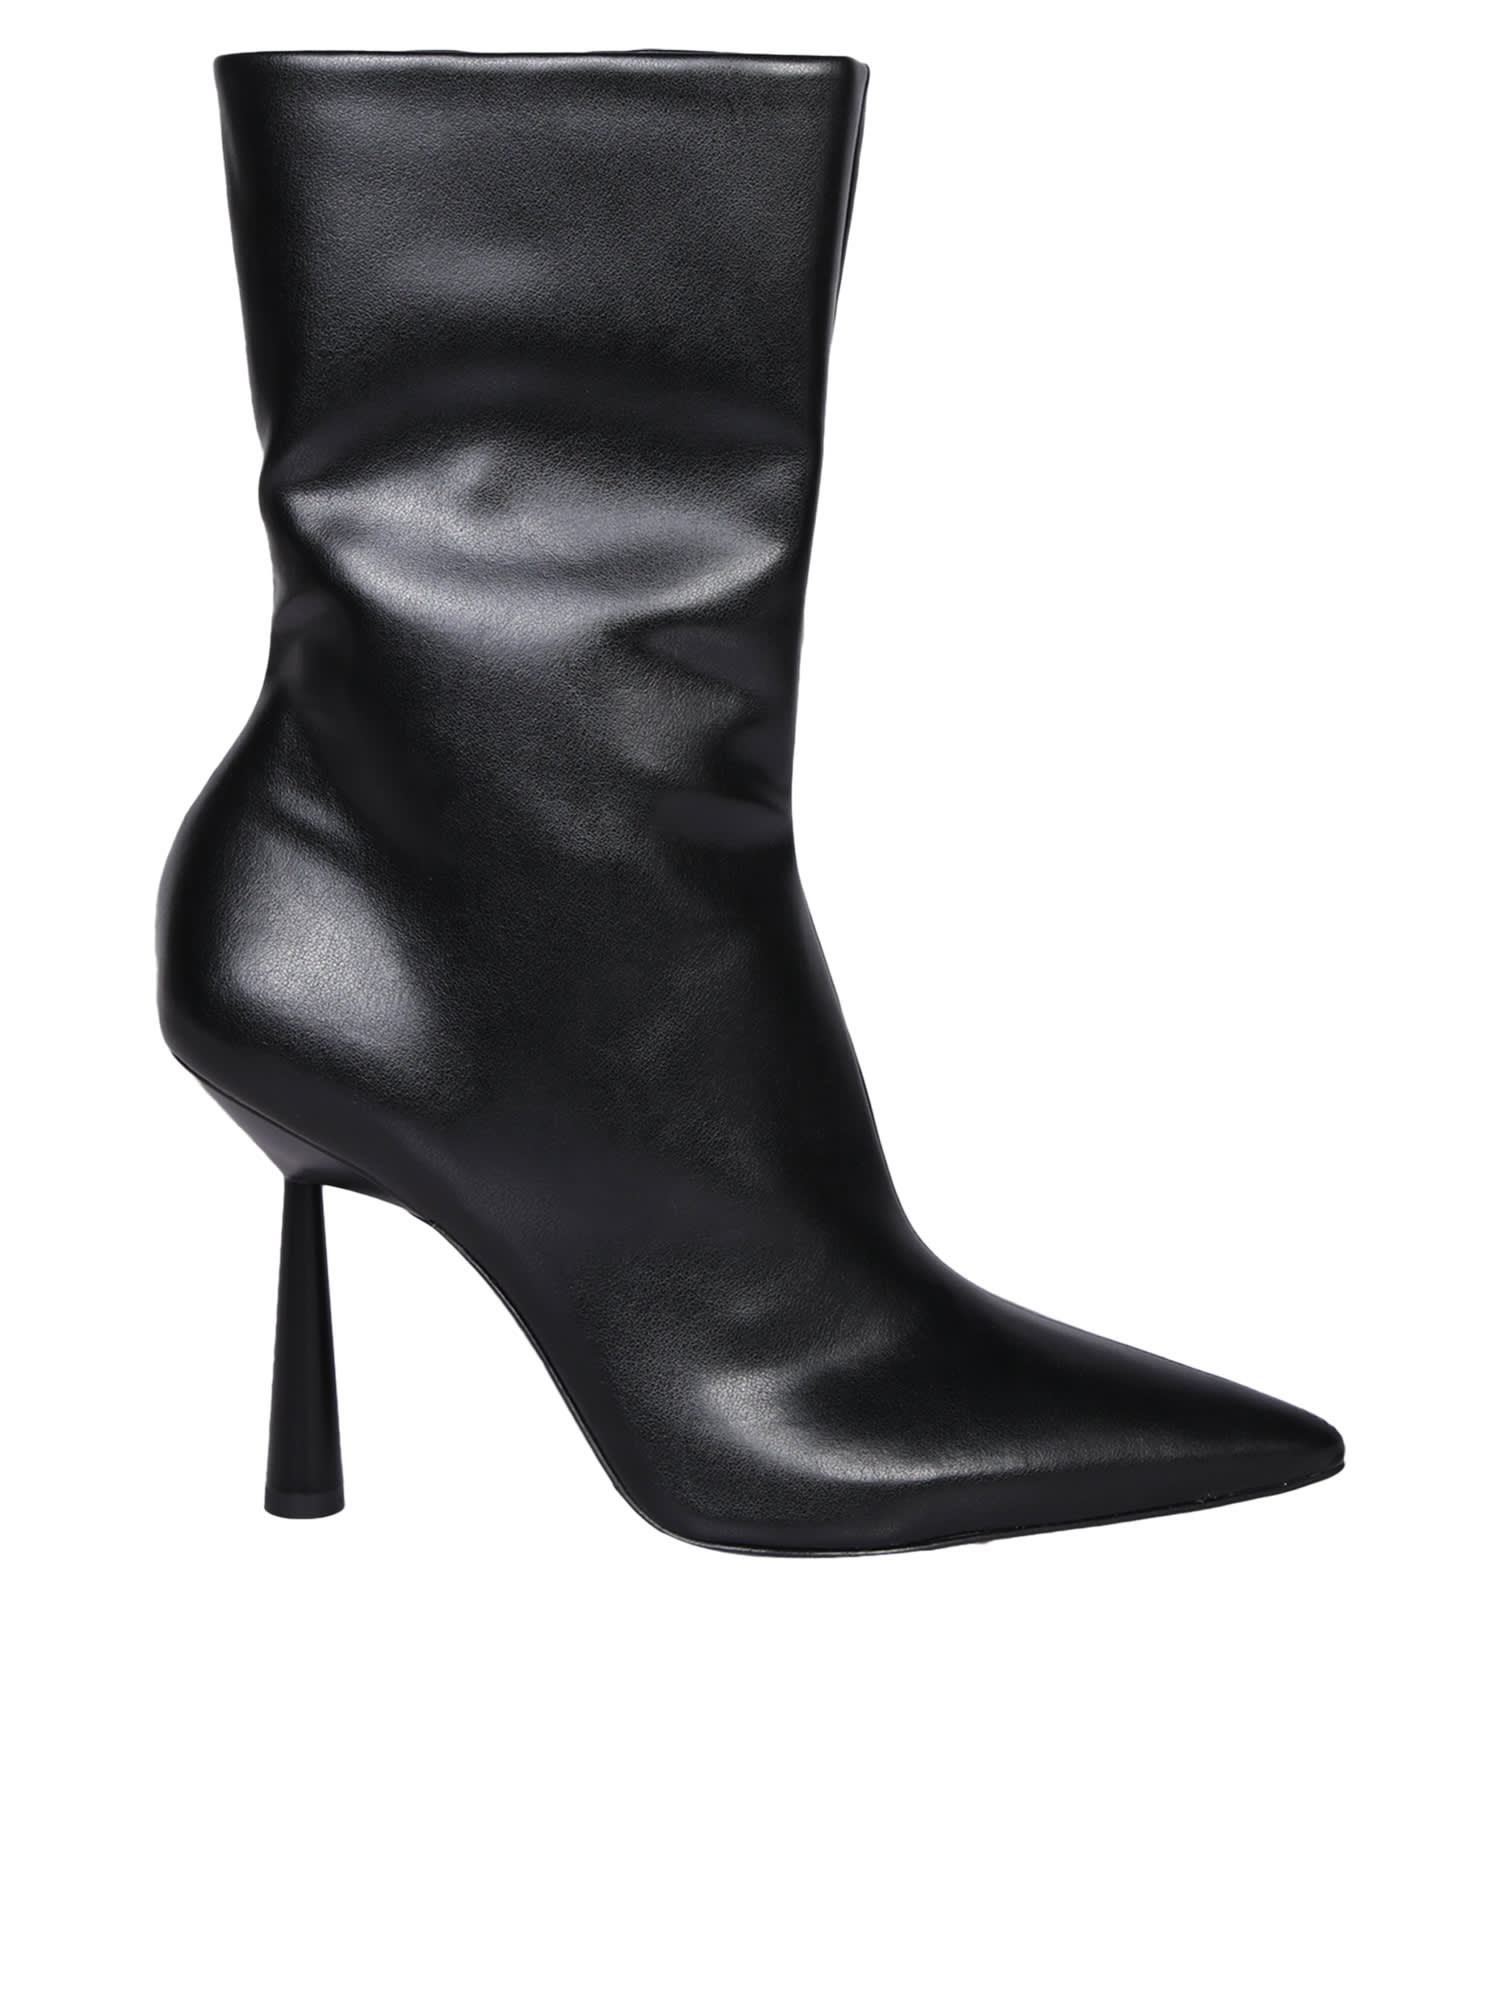 Rosie 7 Black Ankle Boots